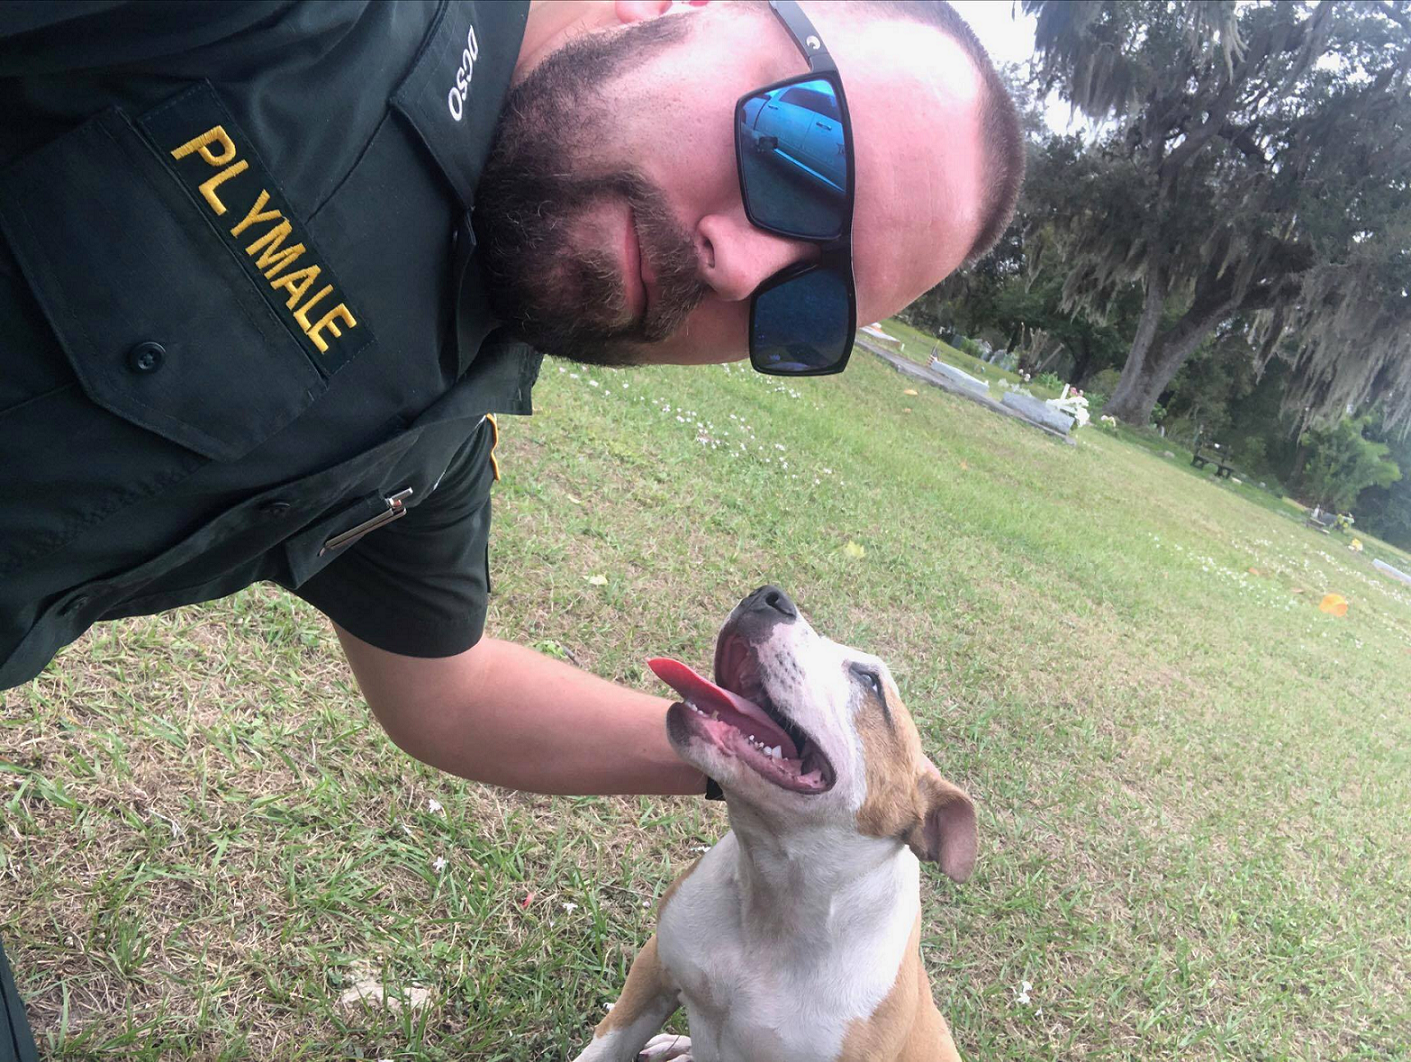 Corporal Plymale and rescued pup. (Credit: DeSoto County Sheriff's Office)